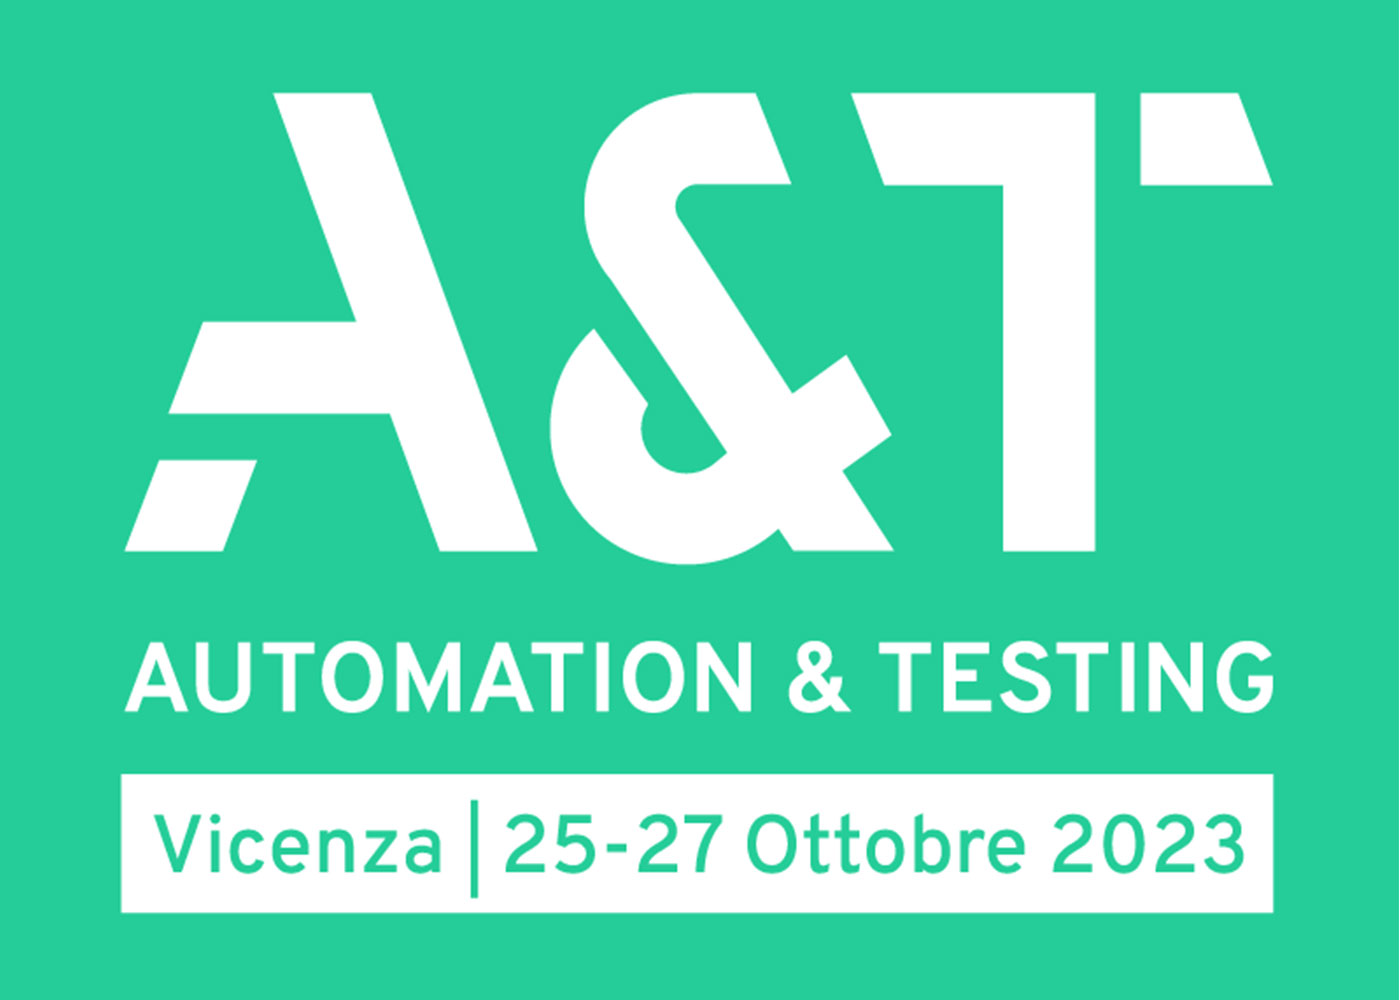 A&T Fair: Automation and Testing